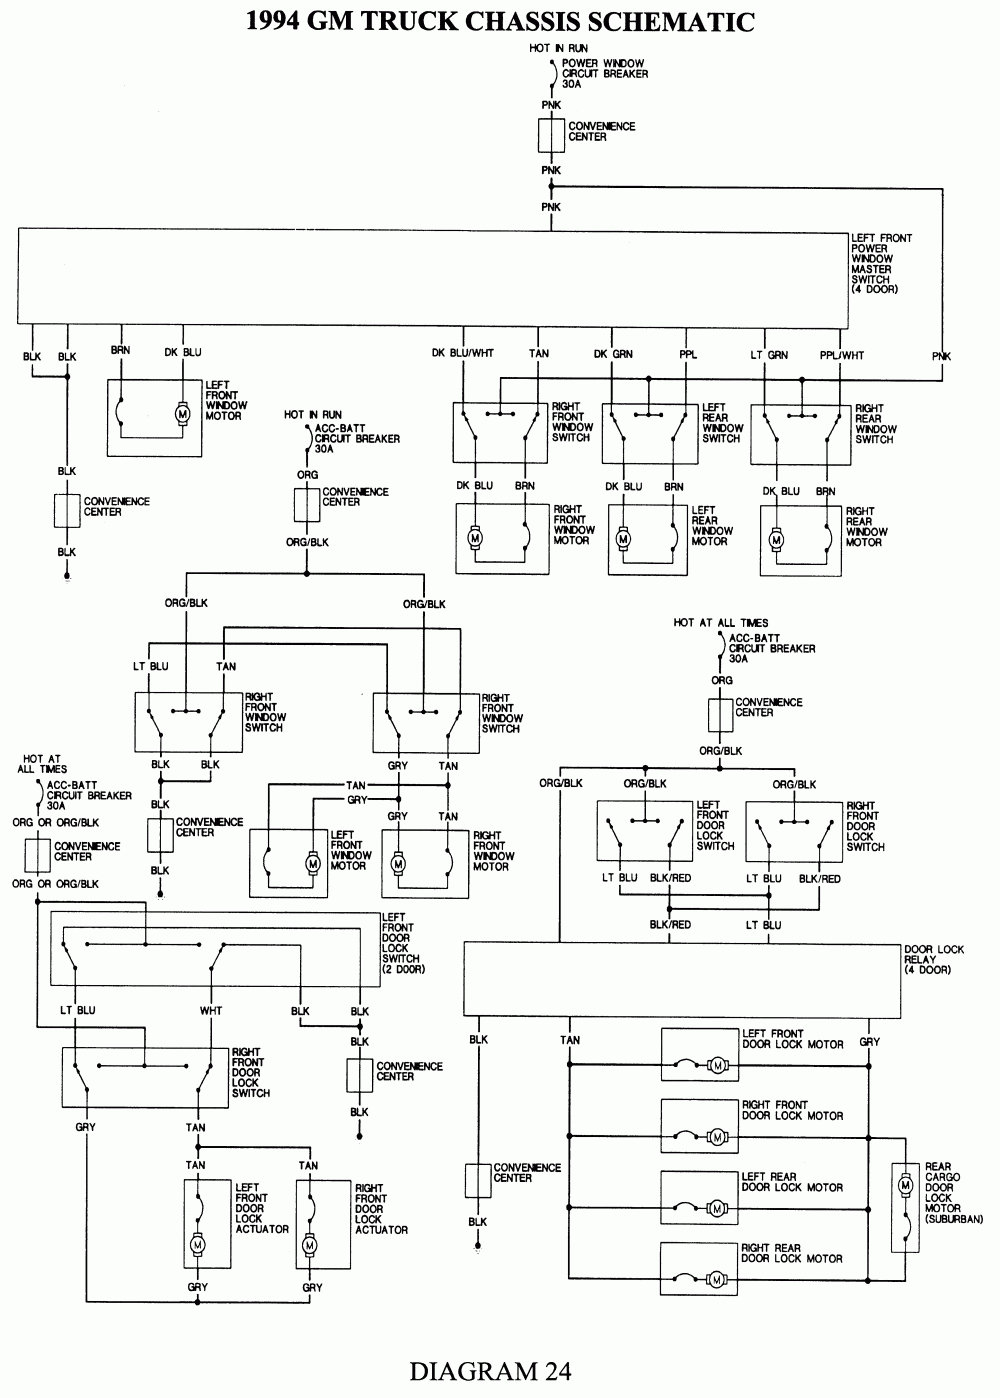 Chevy S10 Stereo Wiring Plug Diagram | Wiring Diagram - 2005 Chevy Impala Radio Wiring Diagram